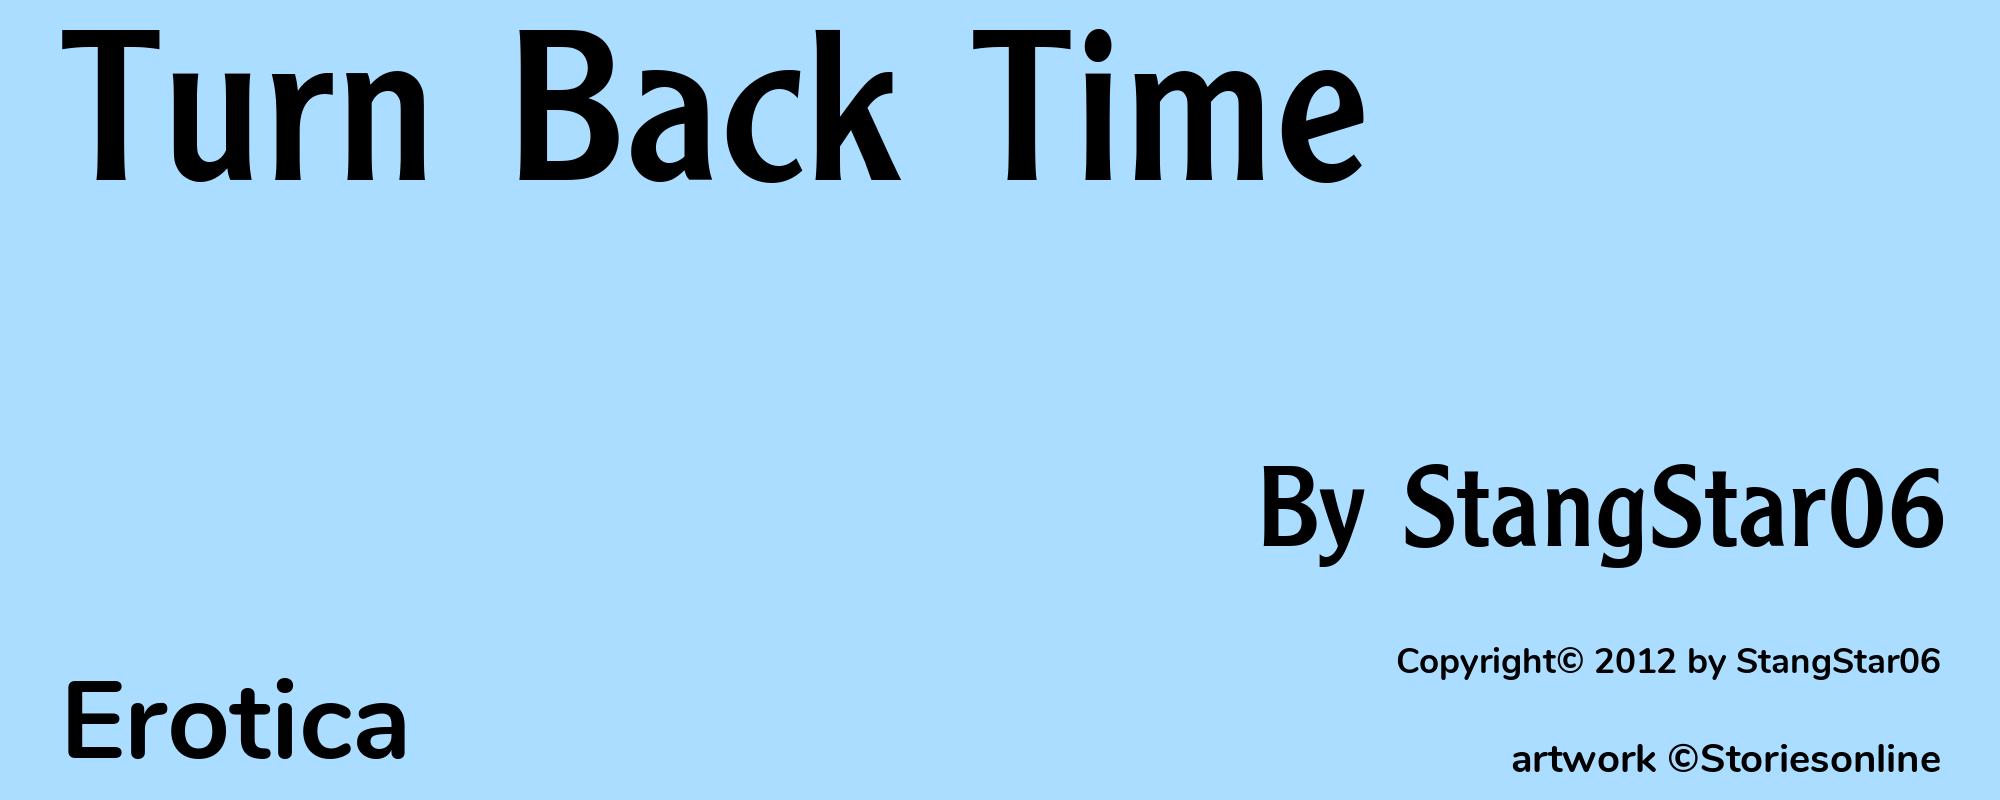 Turn Back Time - Cover